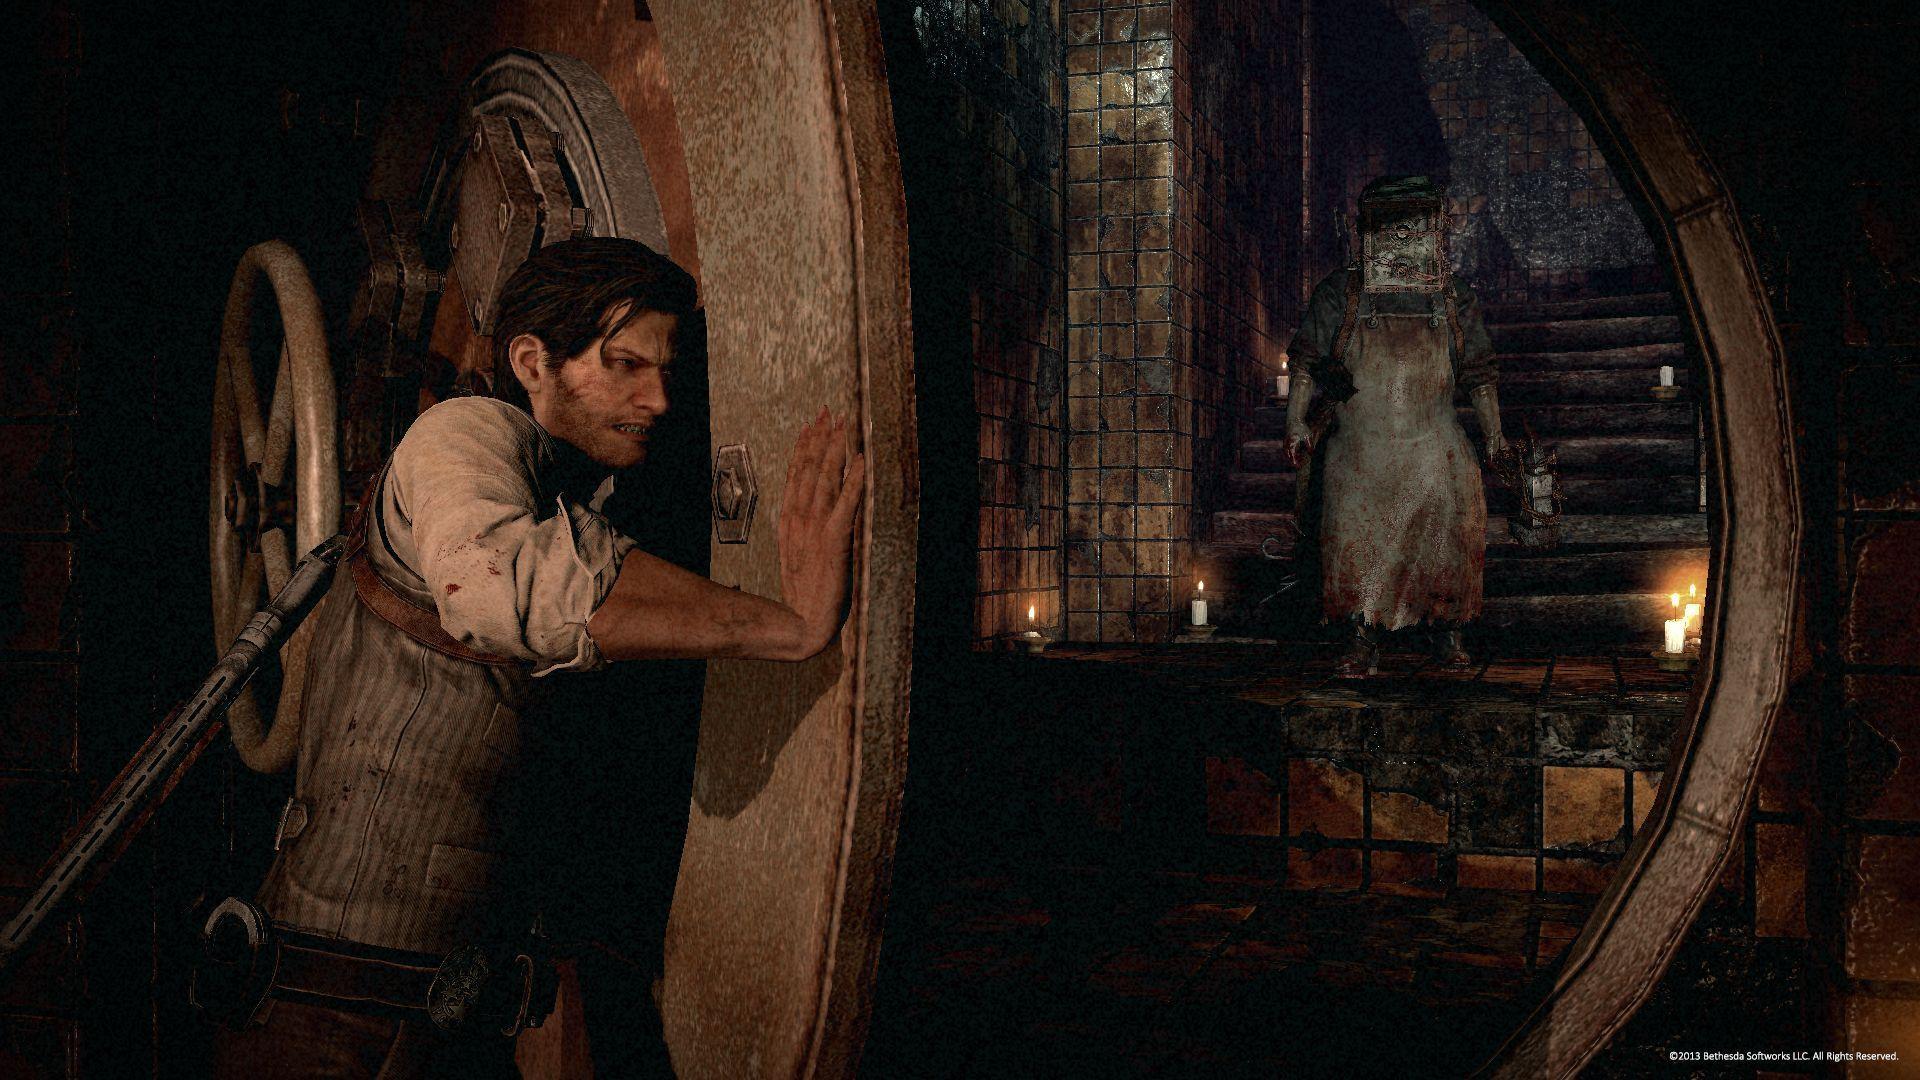 More Screenshots and Concept art from The Evil Within video game